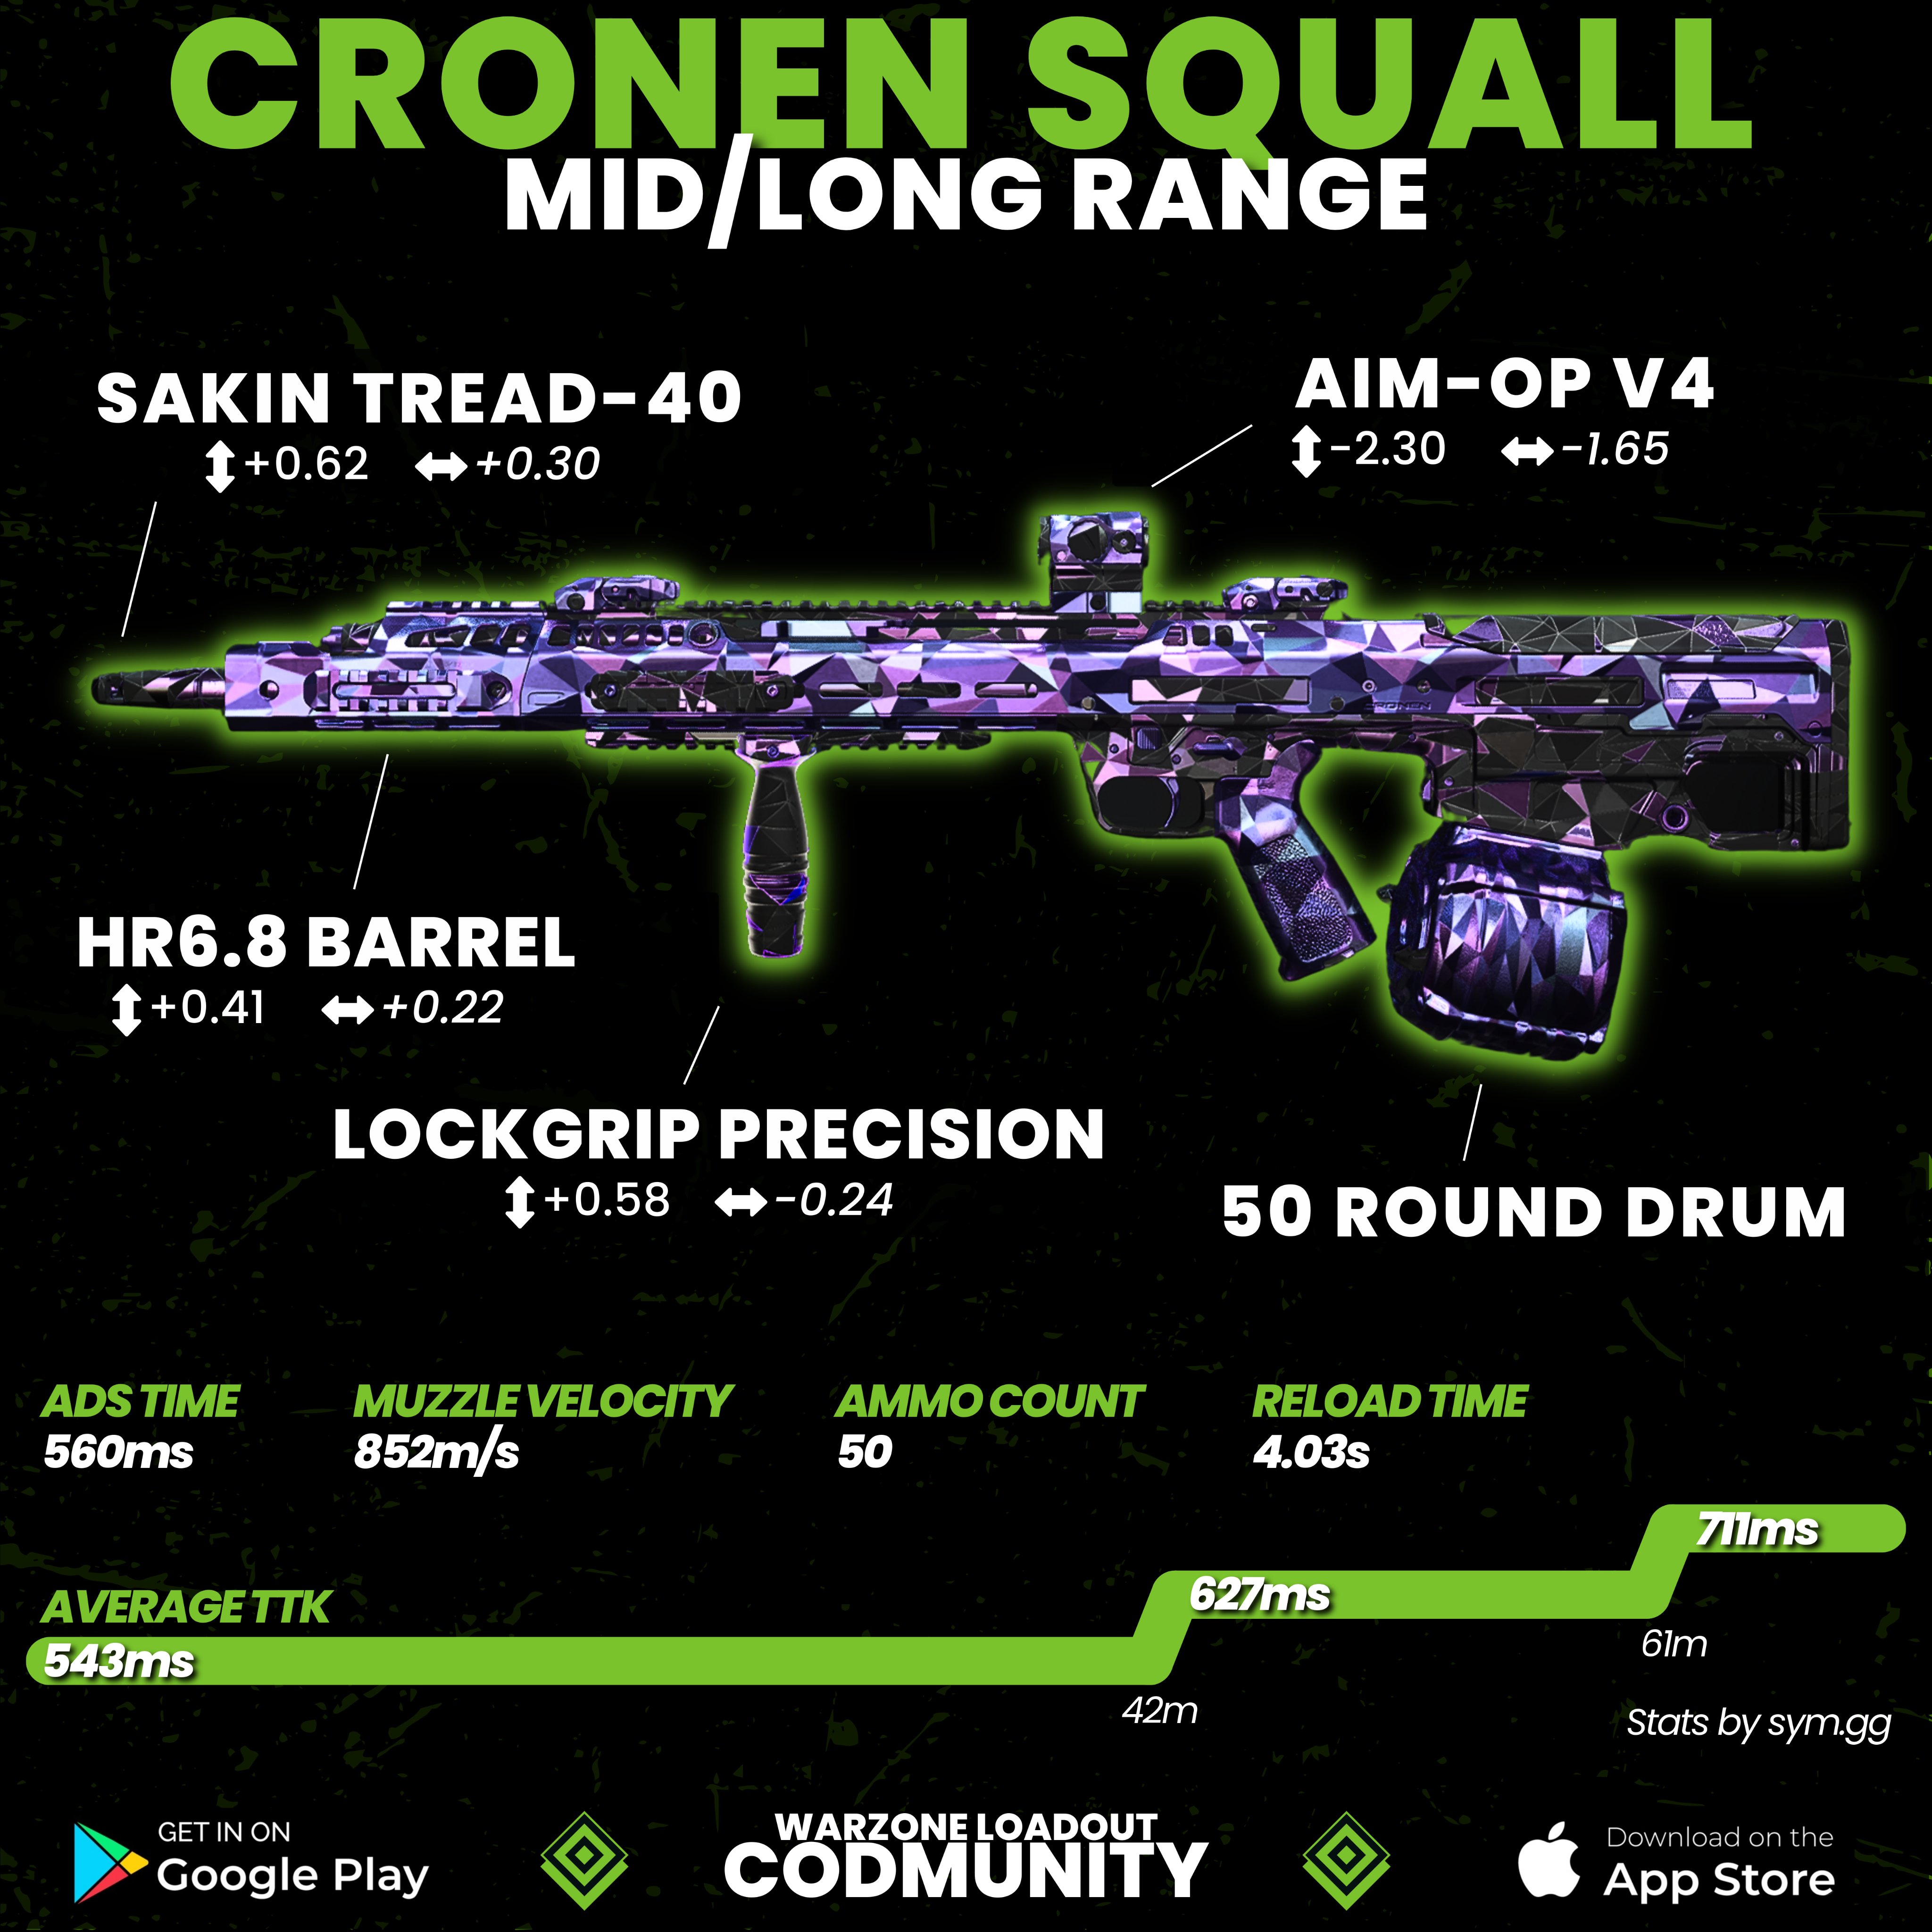 ABSOLUTE META 'DMR' CRONEN SQUALL WARZONE 2.0 RANKED PLAY LOADOUT BUILD